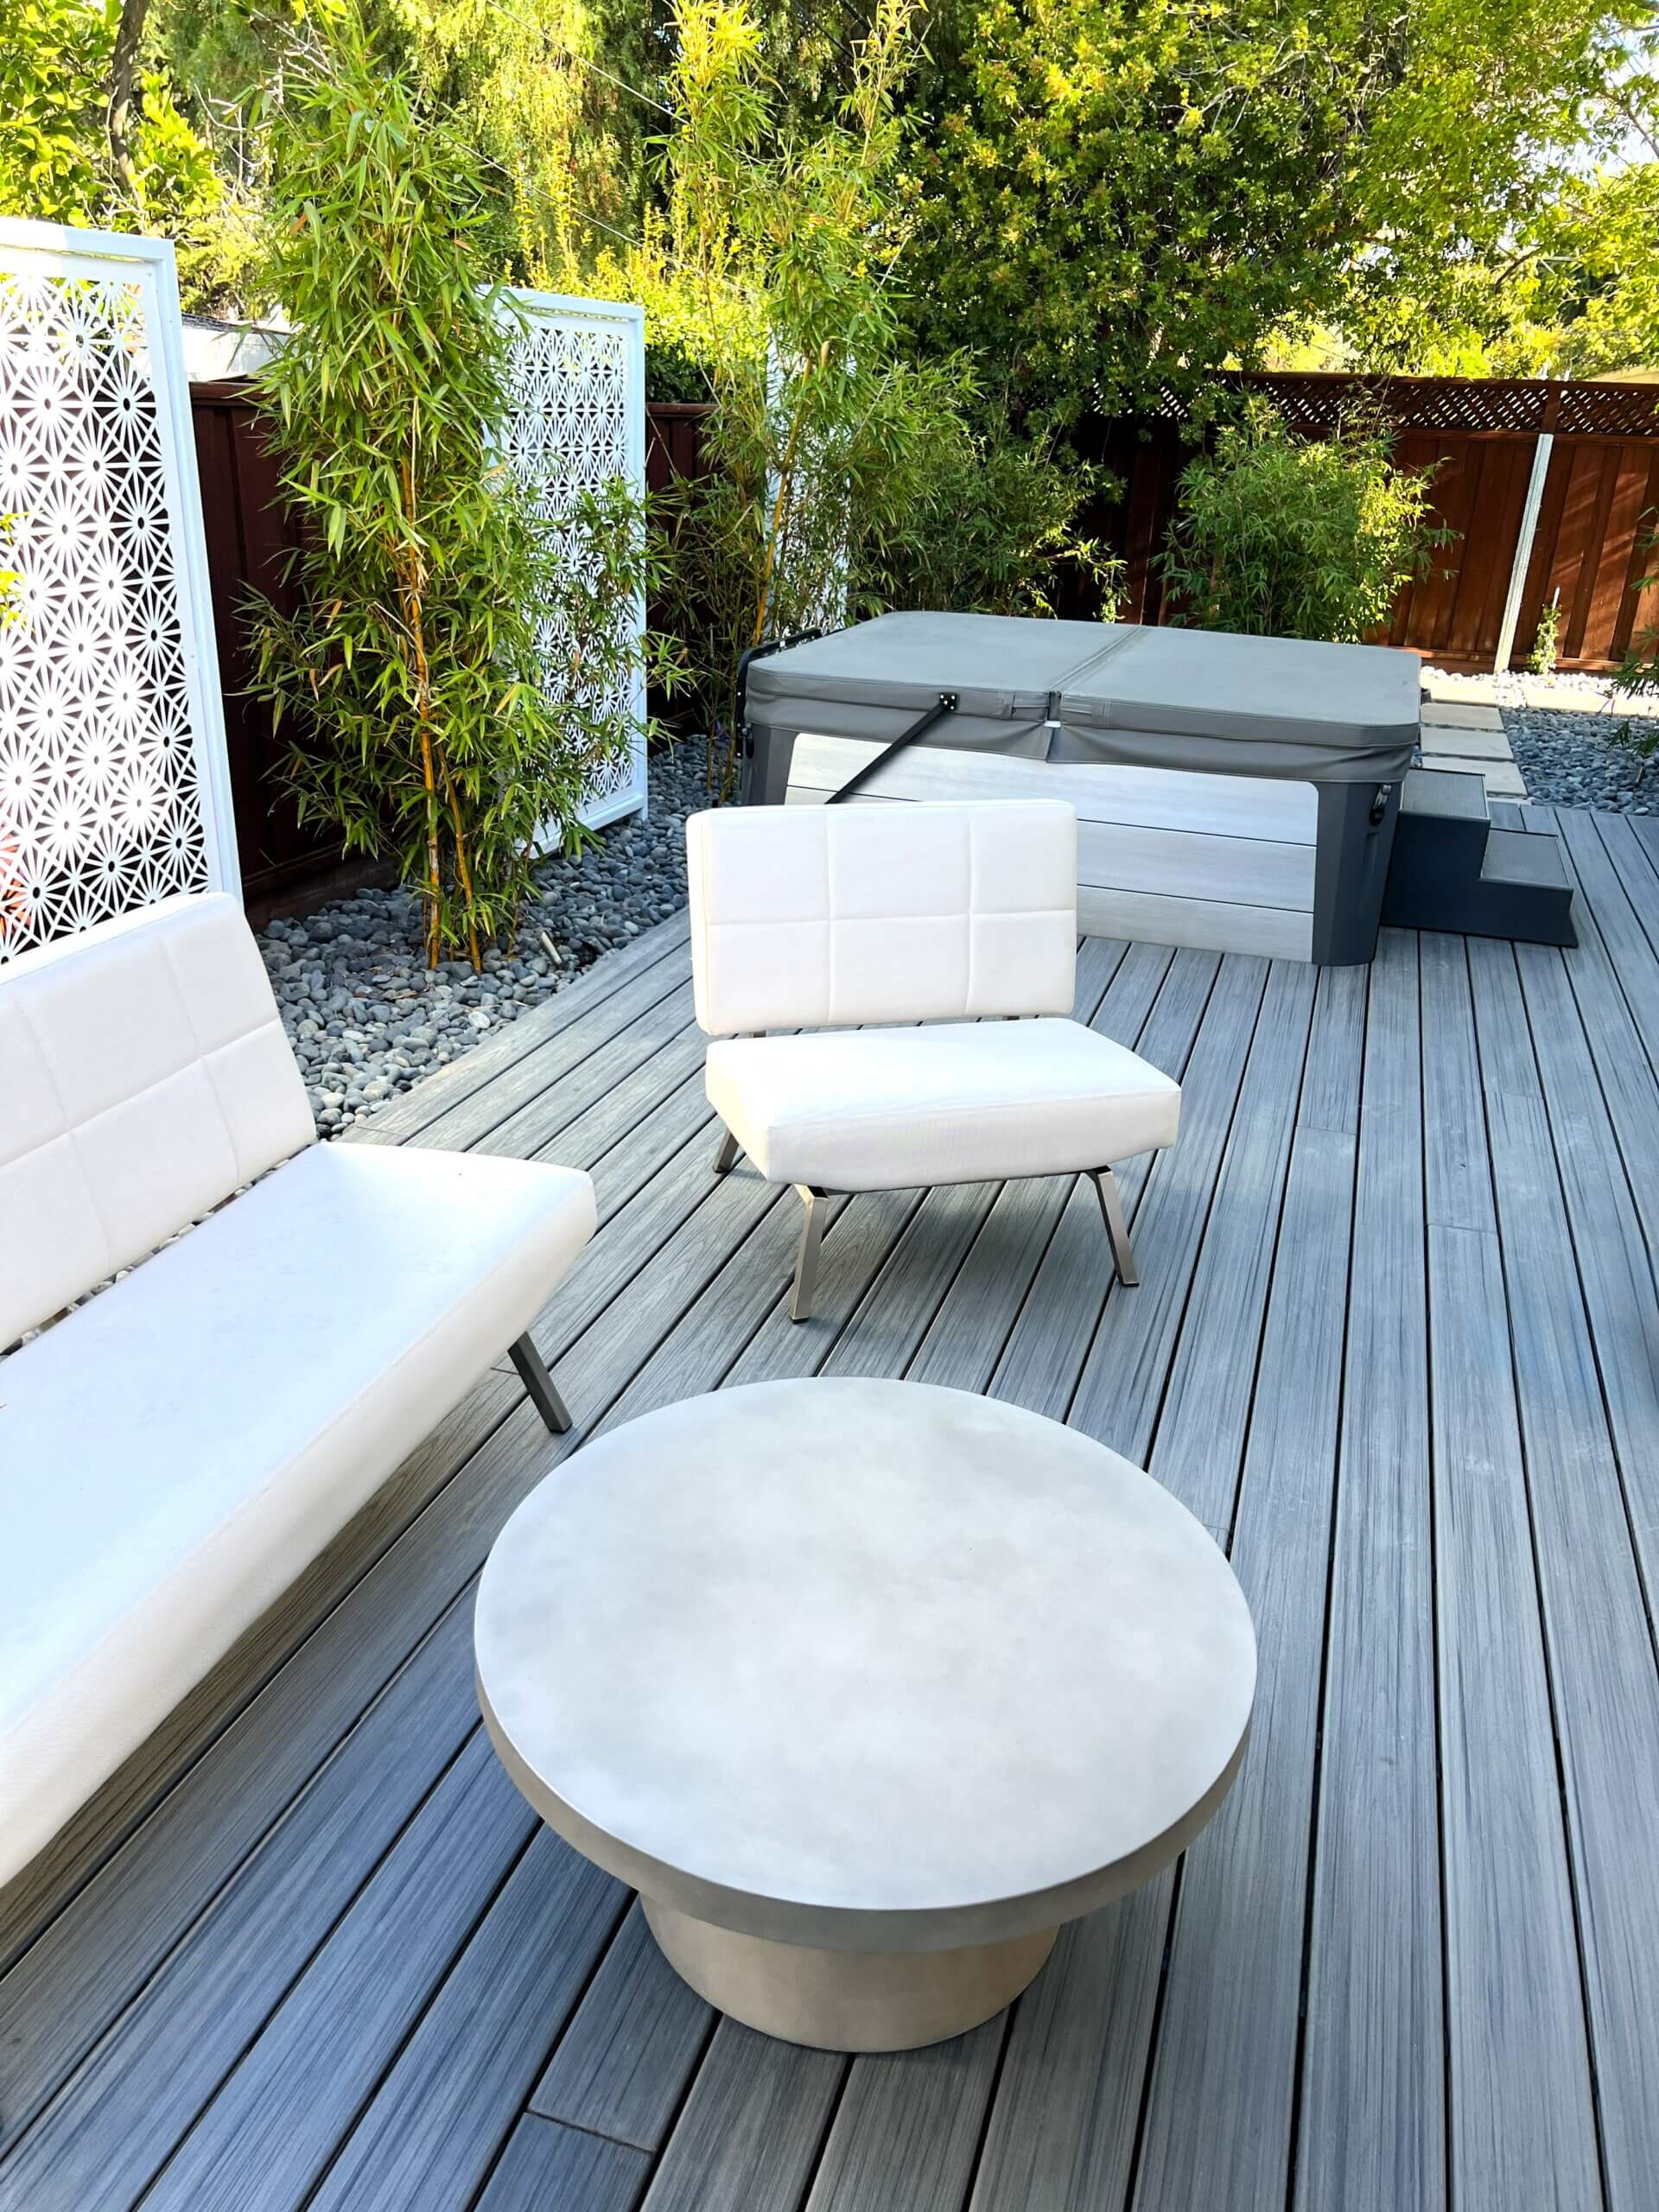 Backyard entertainment deck with spa for Eichler home landscape remodel